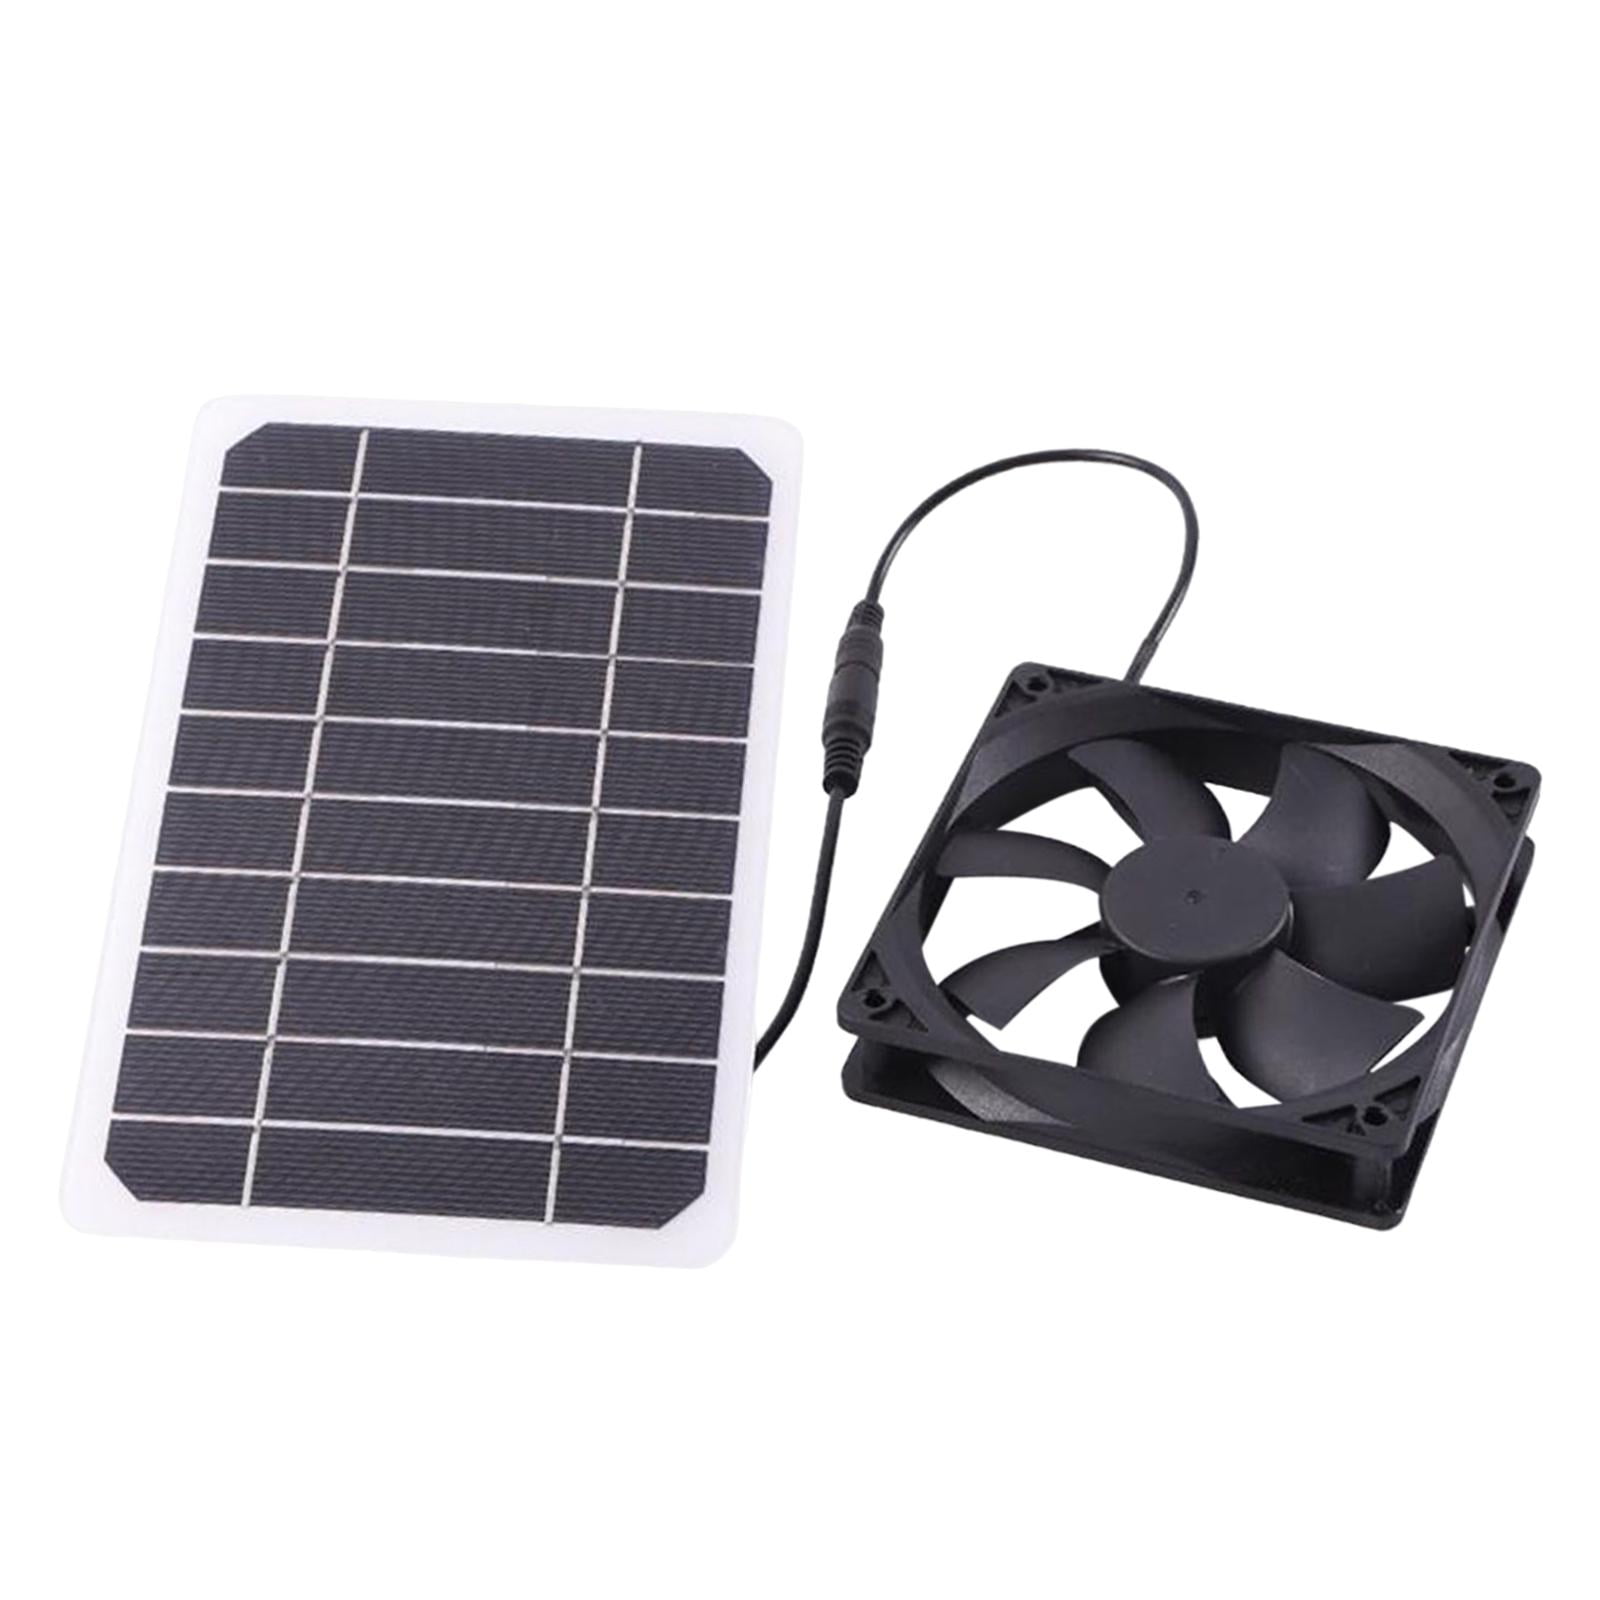 Portable Powered Panel Fan Cooling Solar Powered fan and air Extractor for Chicken Greenhouse RV home - Walmart.com